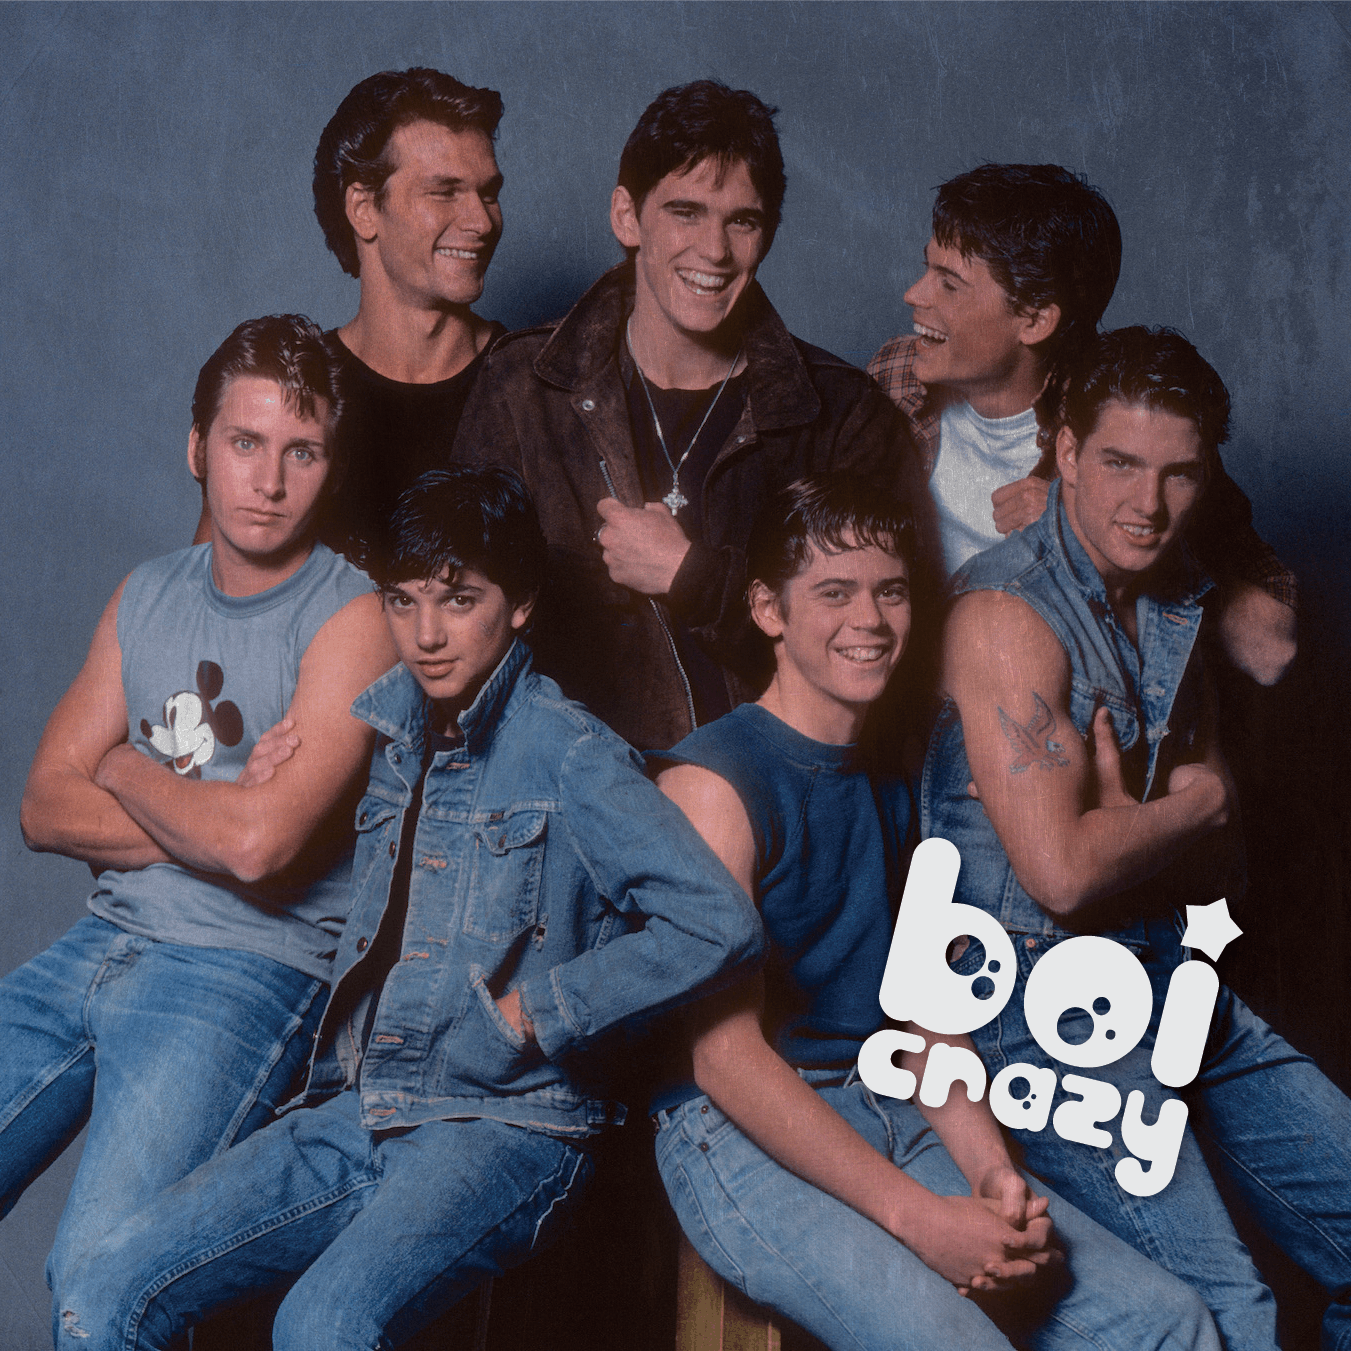 Boi Crazy: The Outsiders (with Chris Fairbanks!)